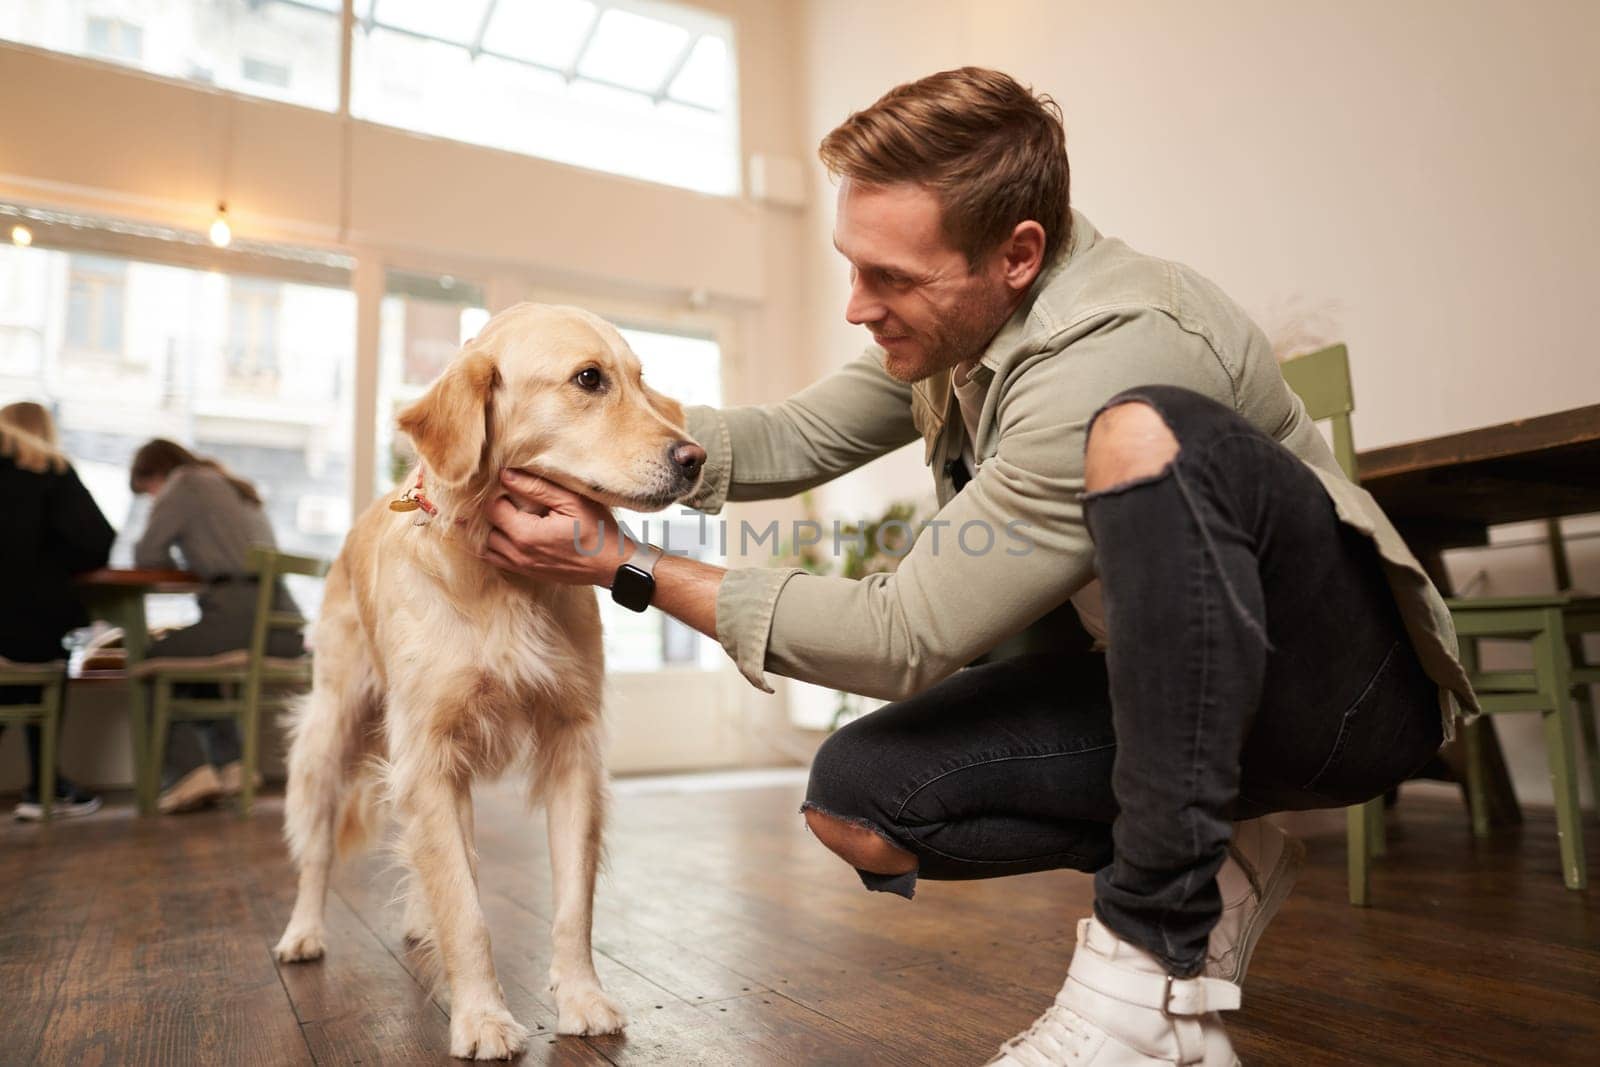 Close up portrait of handsome happy man petting his cute dog in a pet-friendly cafe. Coffee shop visitor with his golden retriever.